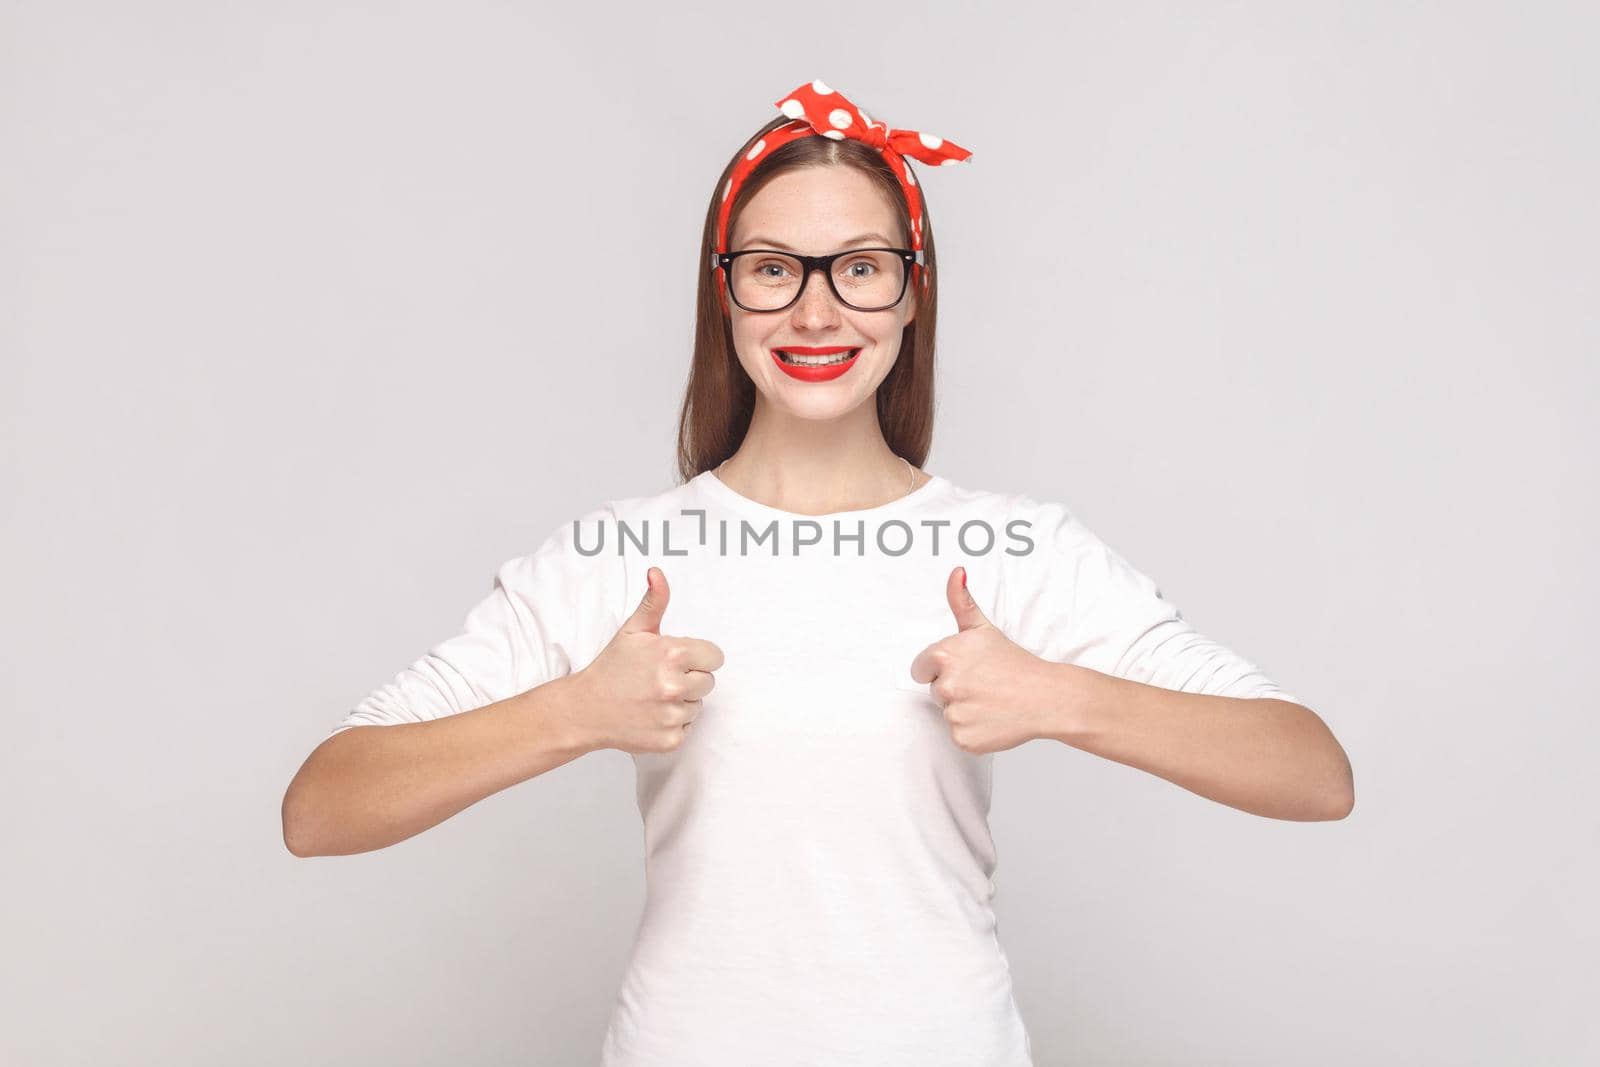 I am satisfied, thumbs up. portrait of beautiful emotional young woman in white t-shirt with freckles, black glasses, red lips and head band. indoor studio shot, isolated on light gray background.